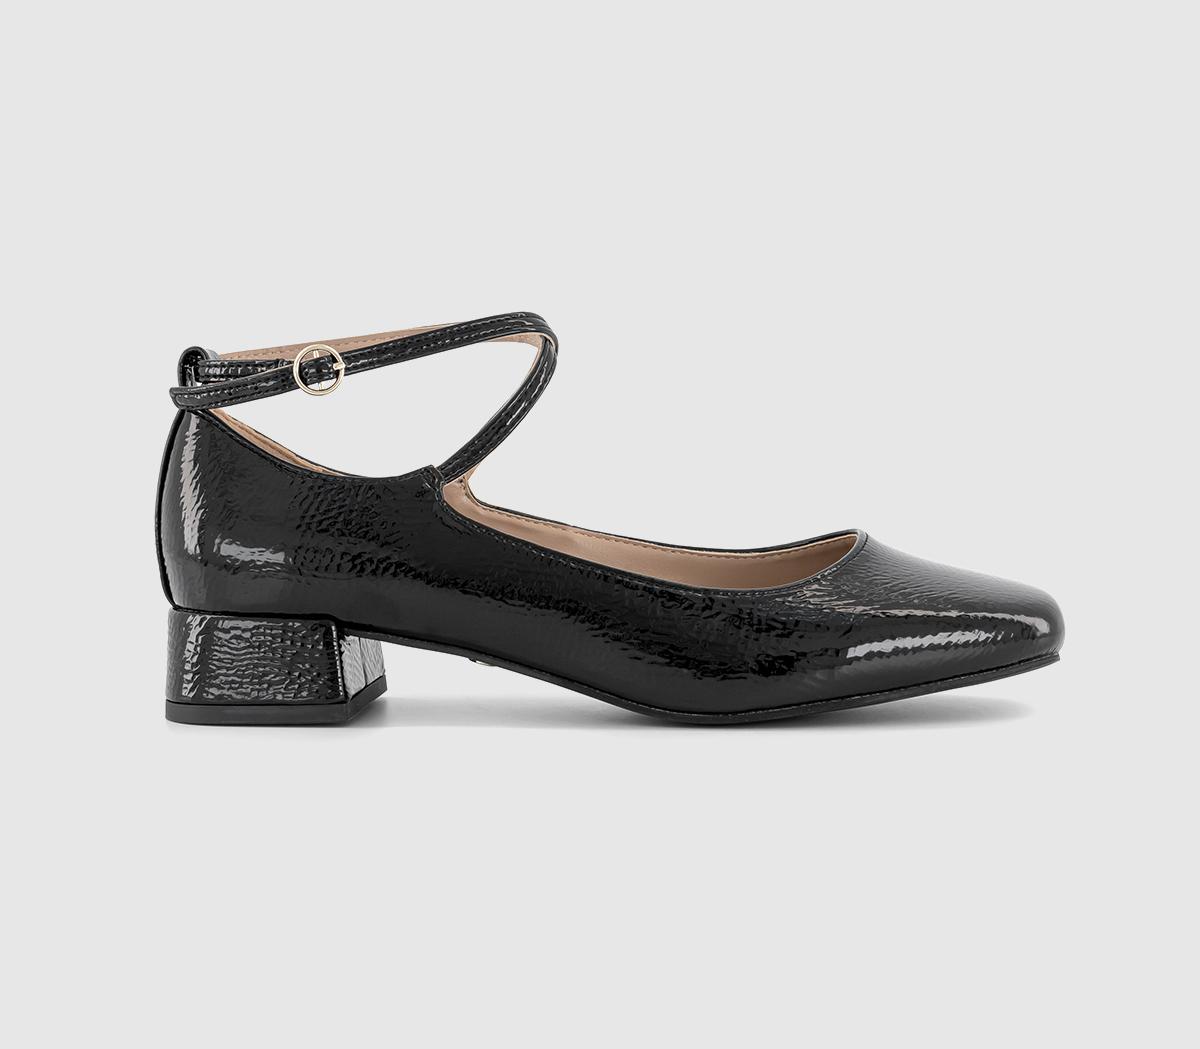 Francesca Cross Over Ankle Strap Mary Jane Shoes Black Patent